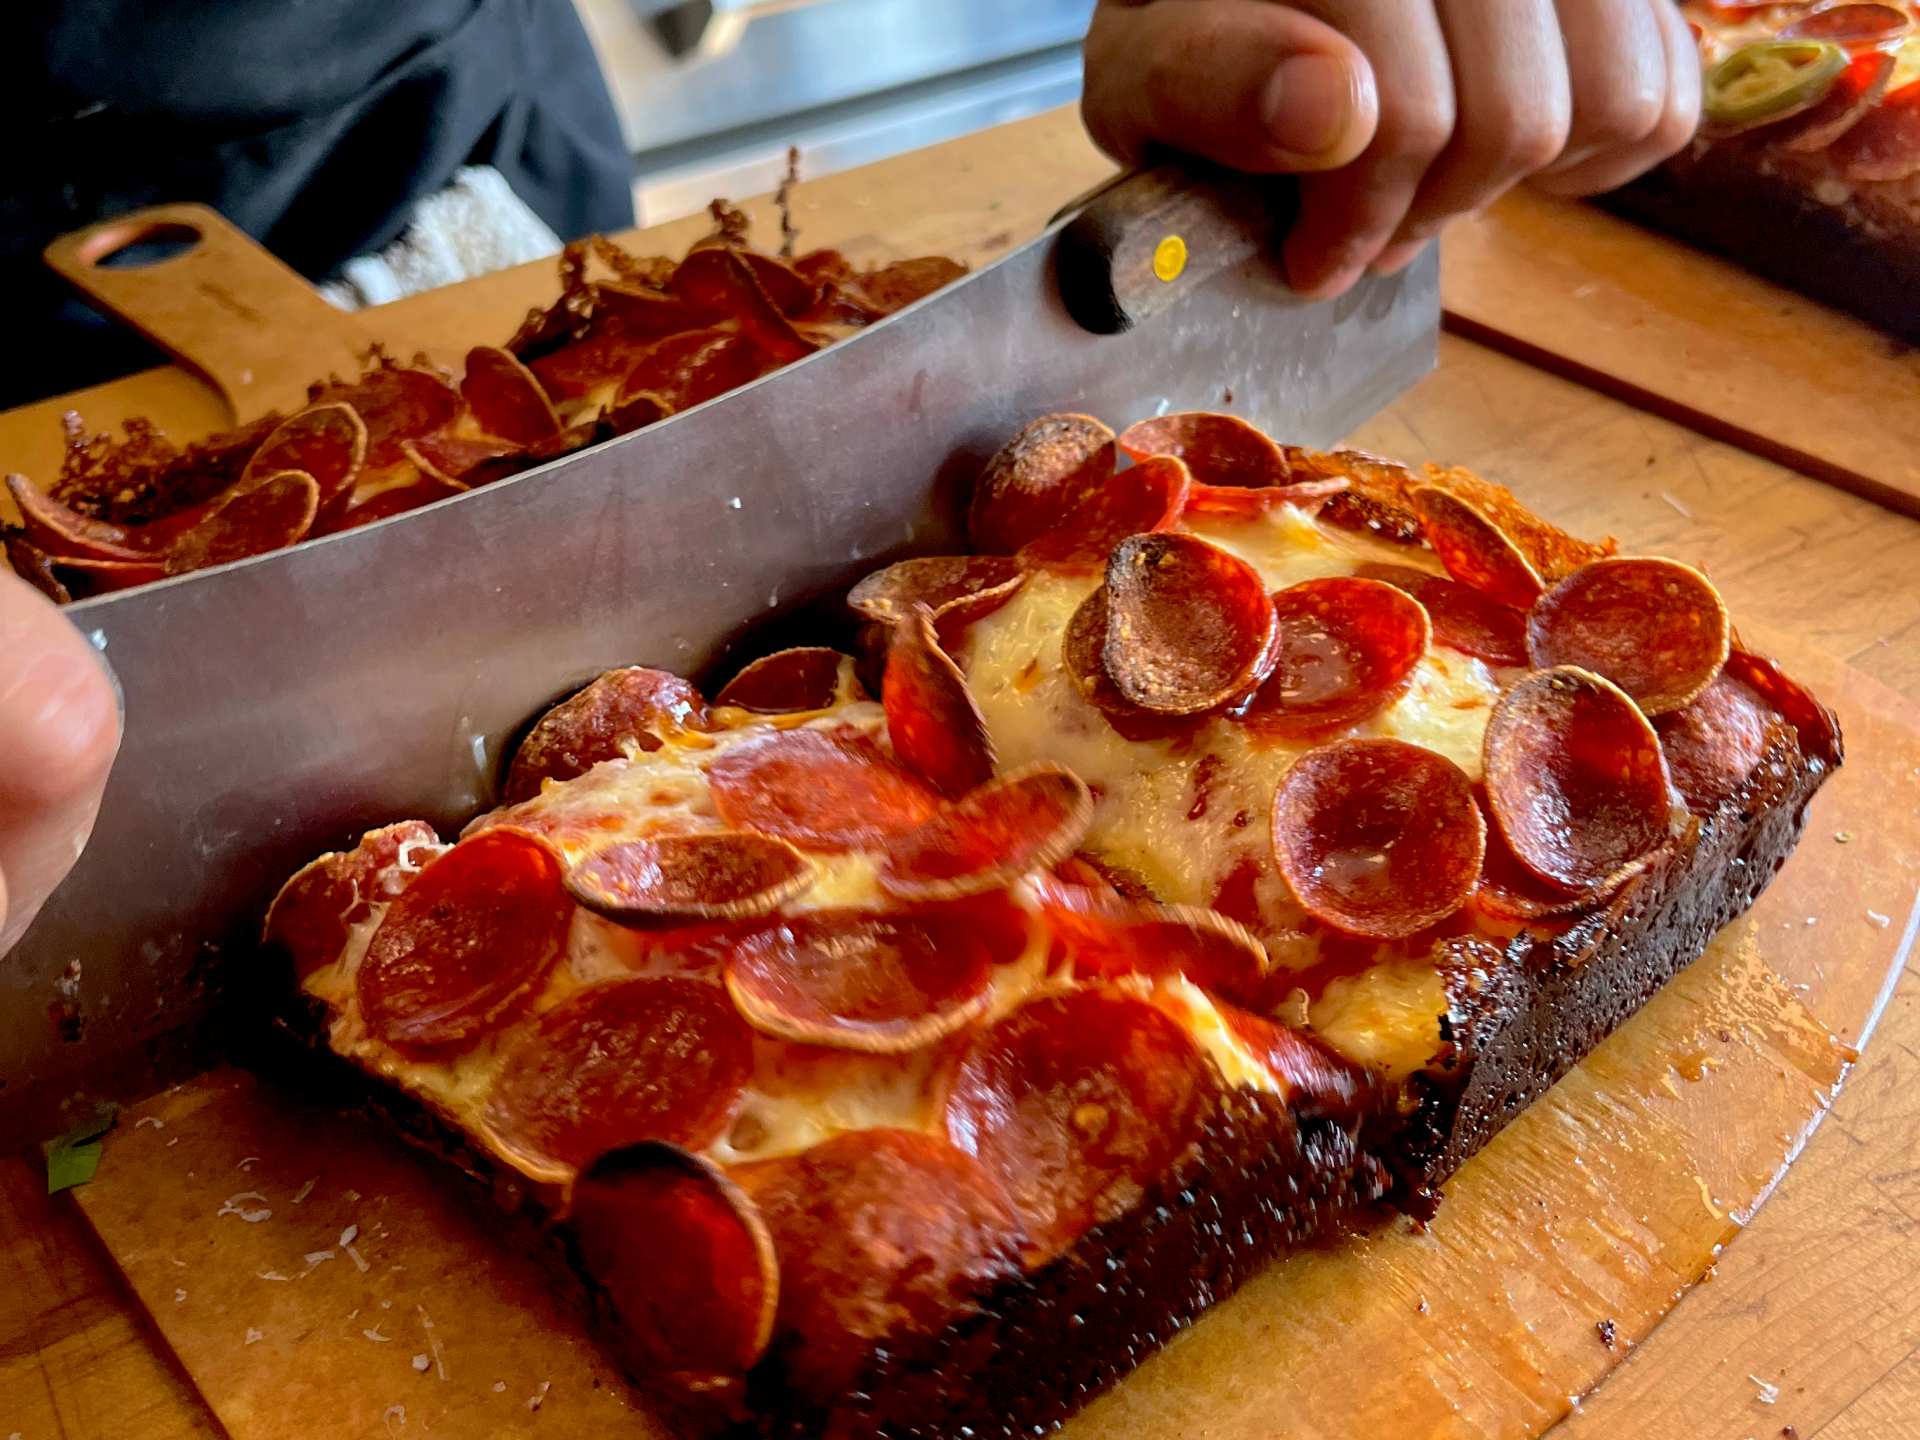 Slicing a Double Trouble pizza at Slowhand Sourdough Pizza